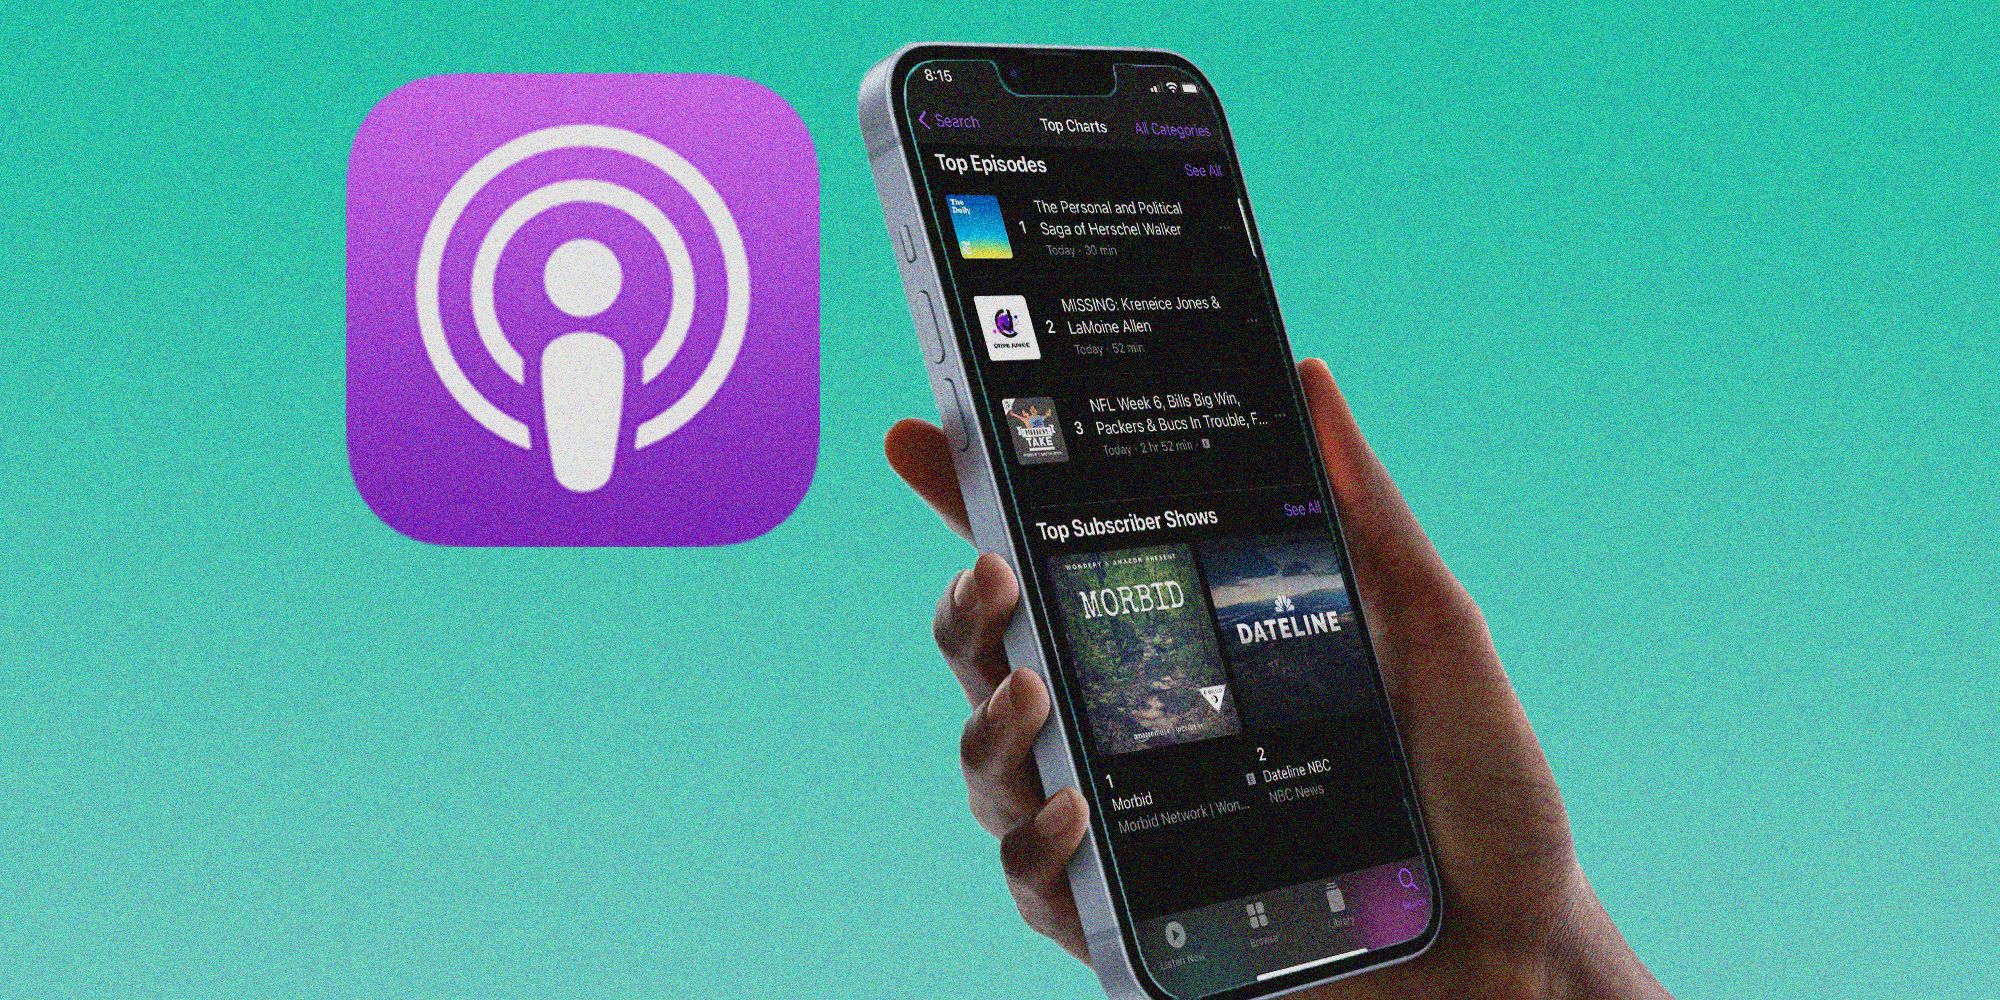 Apple Podcast Charts: How To Find Top Podcasts & Episodes